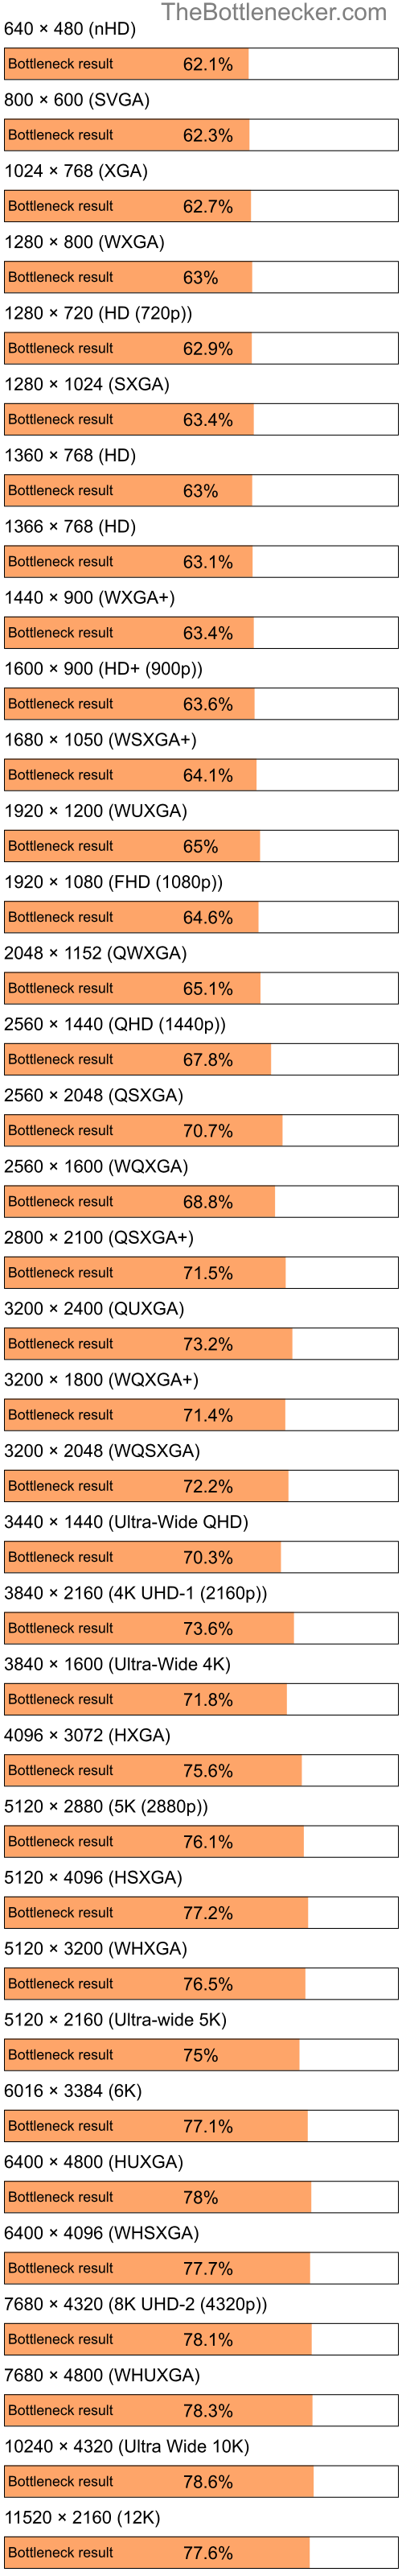 Bottleneck results by resolution for Intel Celeron M 410 and AMD Mobility Radeon HD 3430 in General Tasks